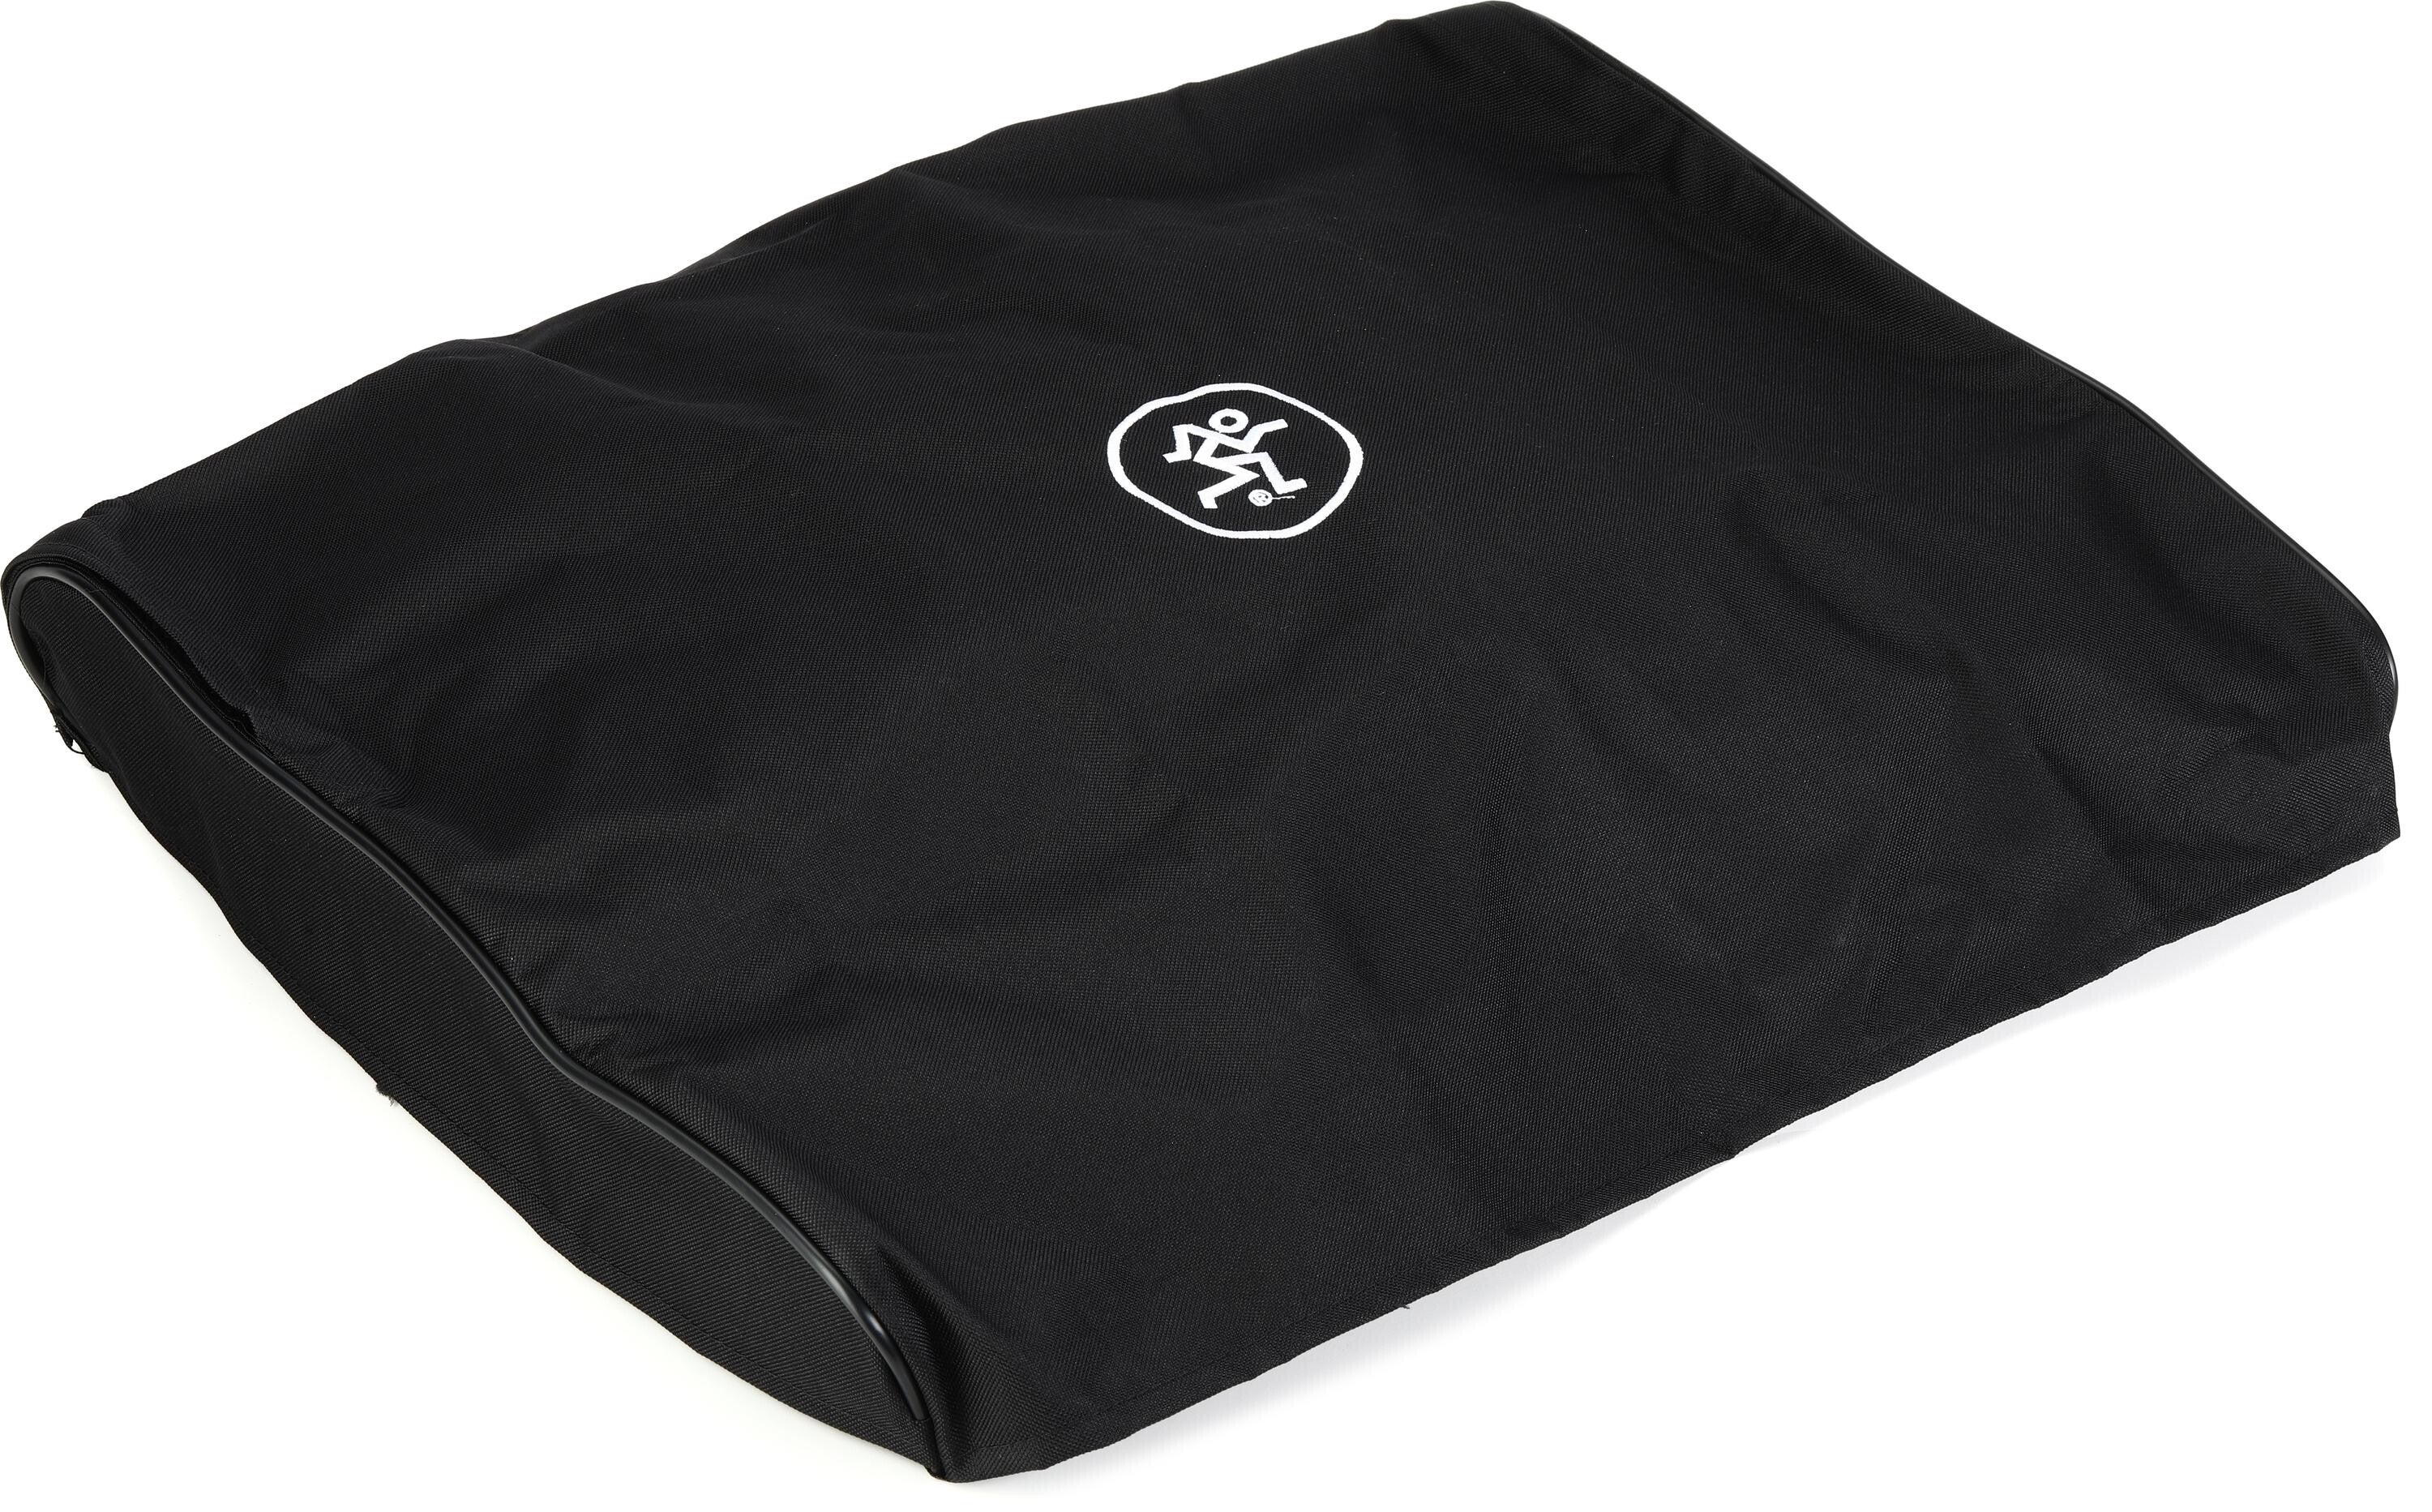 Mackie ProFX22v3 Mixer Bag | Sweetwater